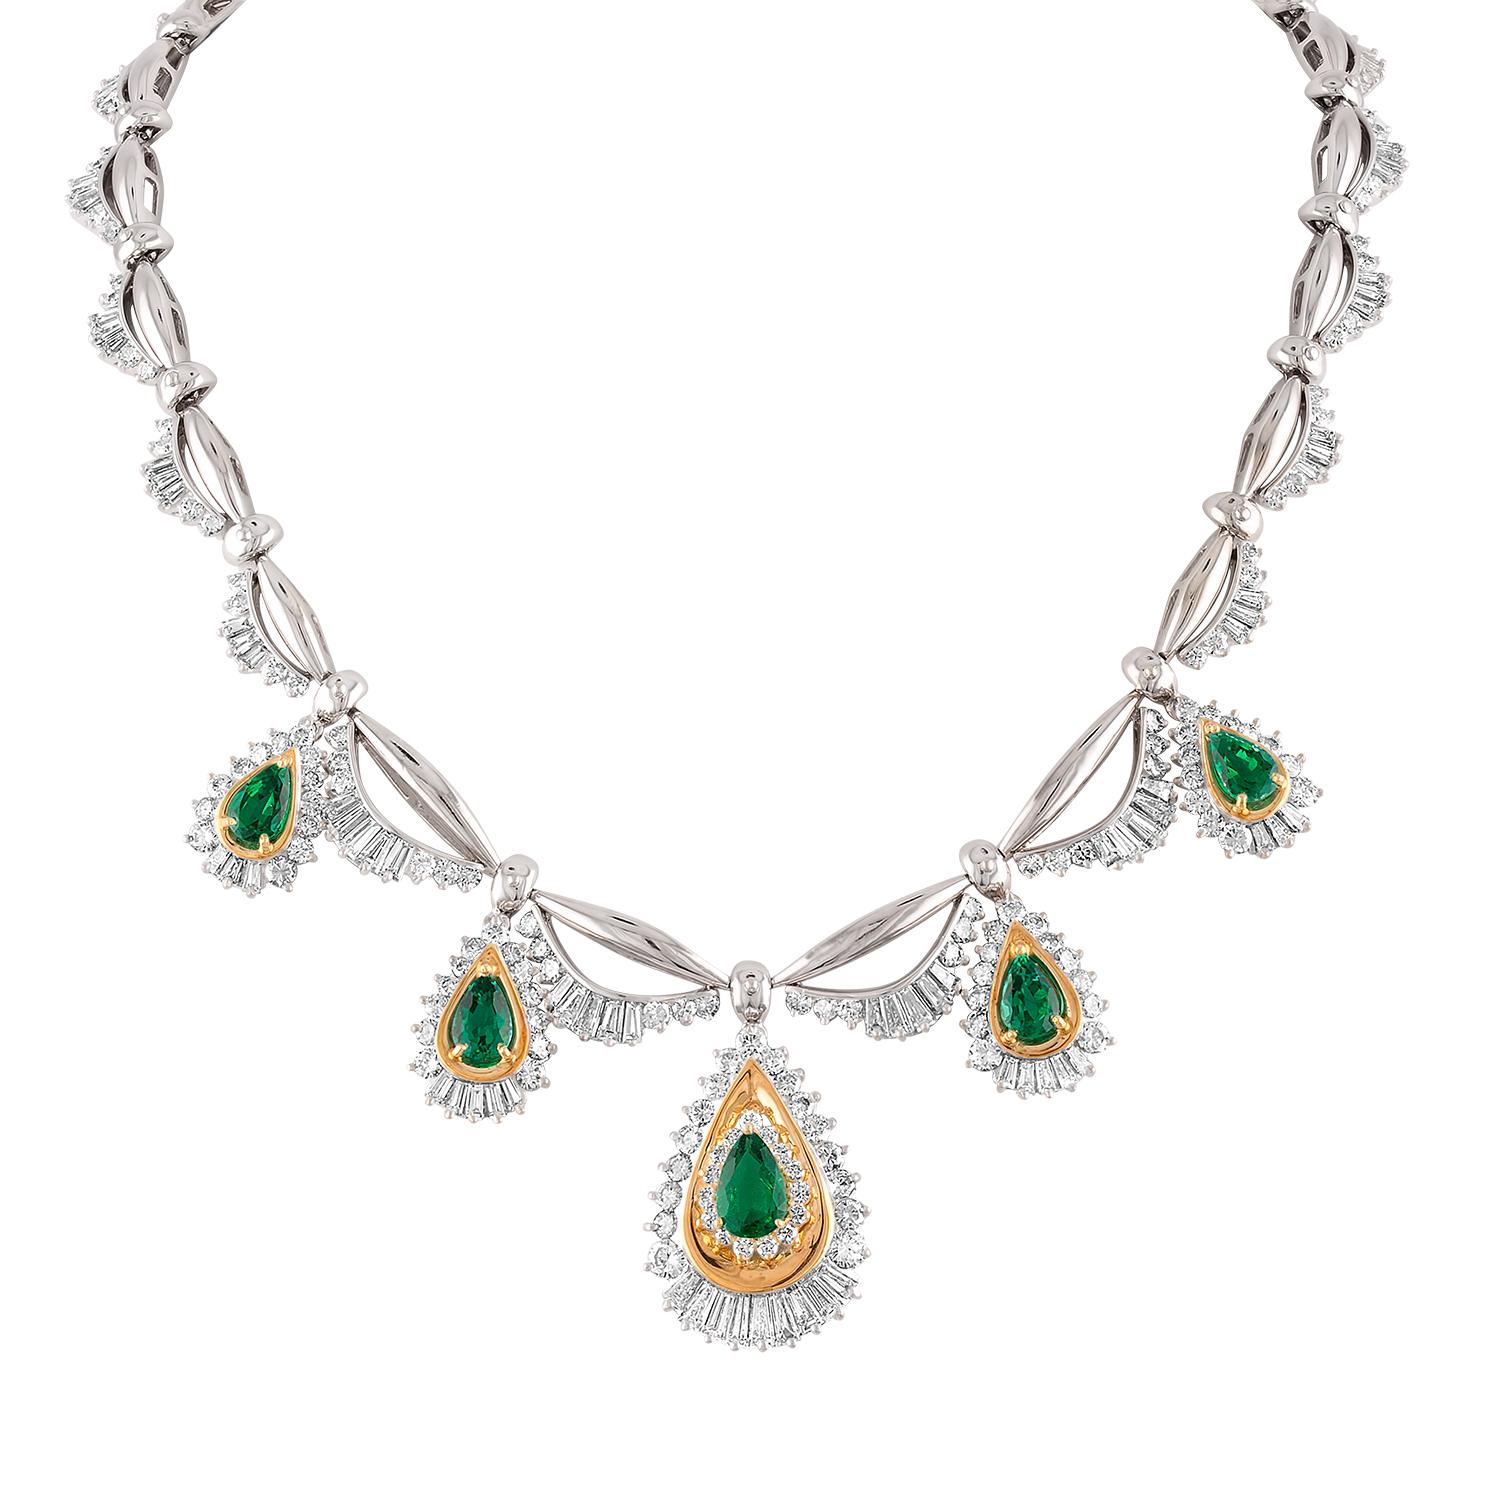 Stunning Bridal or Event Set Suite
The set consists of Earrings and Necklace
The set is 14K White & Yellow Gold

The Necklace has 16.00 Carats In Diamonds  F/G SI
There are 8.00 Carats in Zambian Emeralds
The necklace is 16